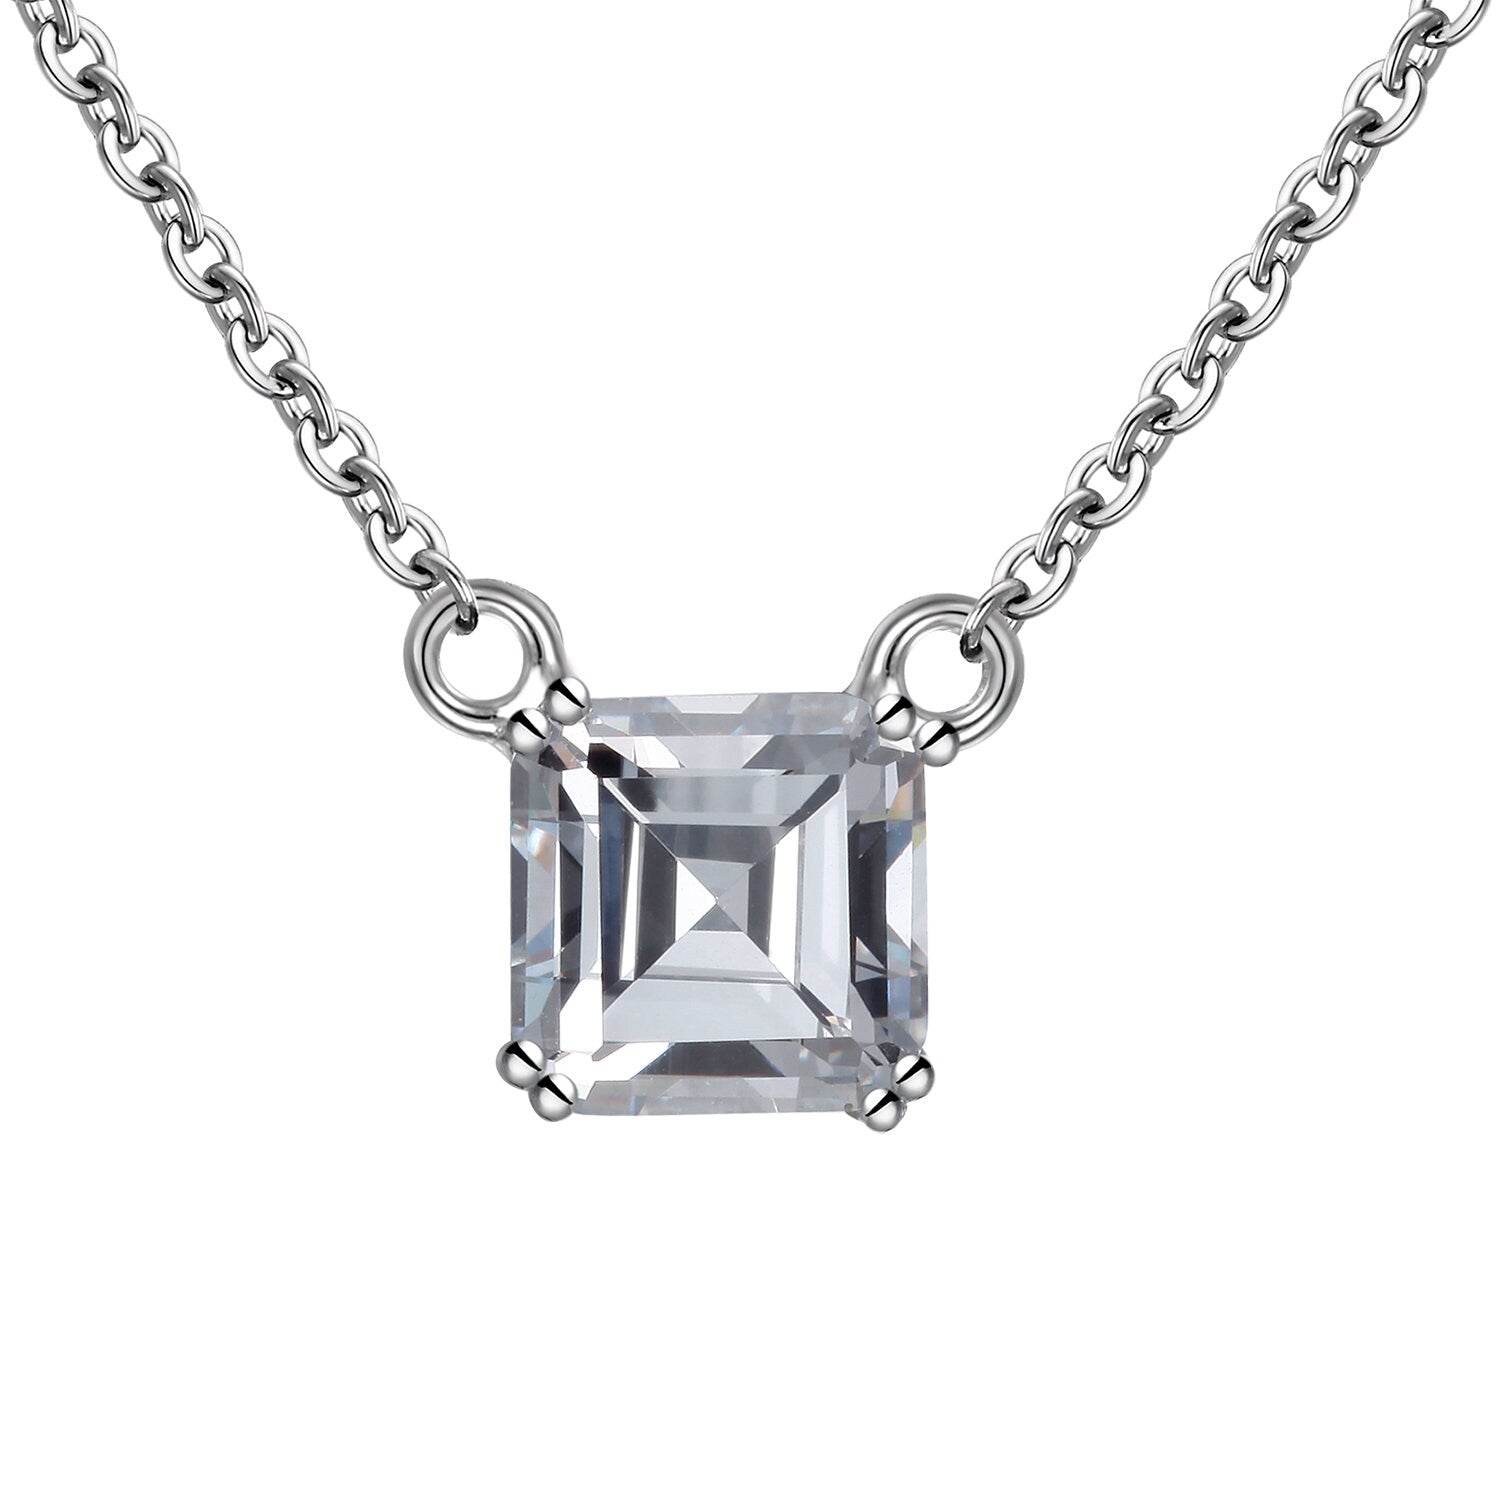 LORNA- 925 Sterling Silver dainty Necklace,Solitaire Asscher necklace, Man Made Diamond Stimulant, Bridal Wedding Gift